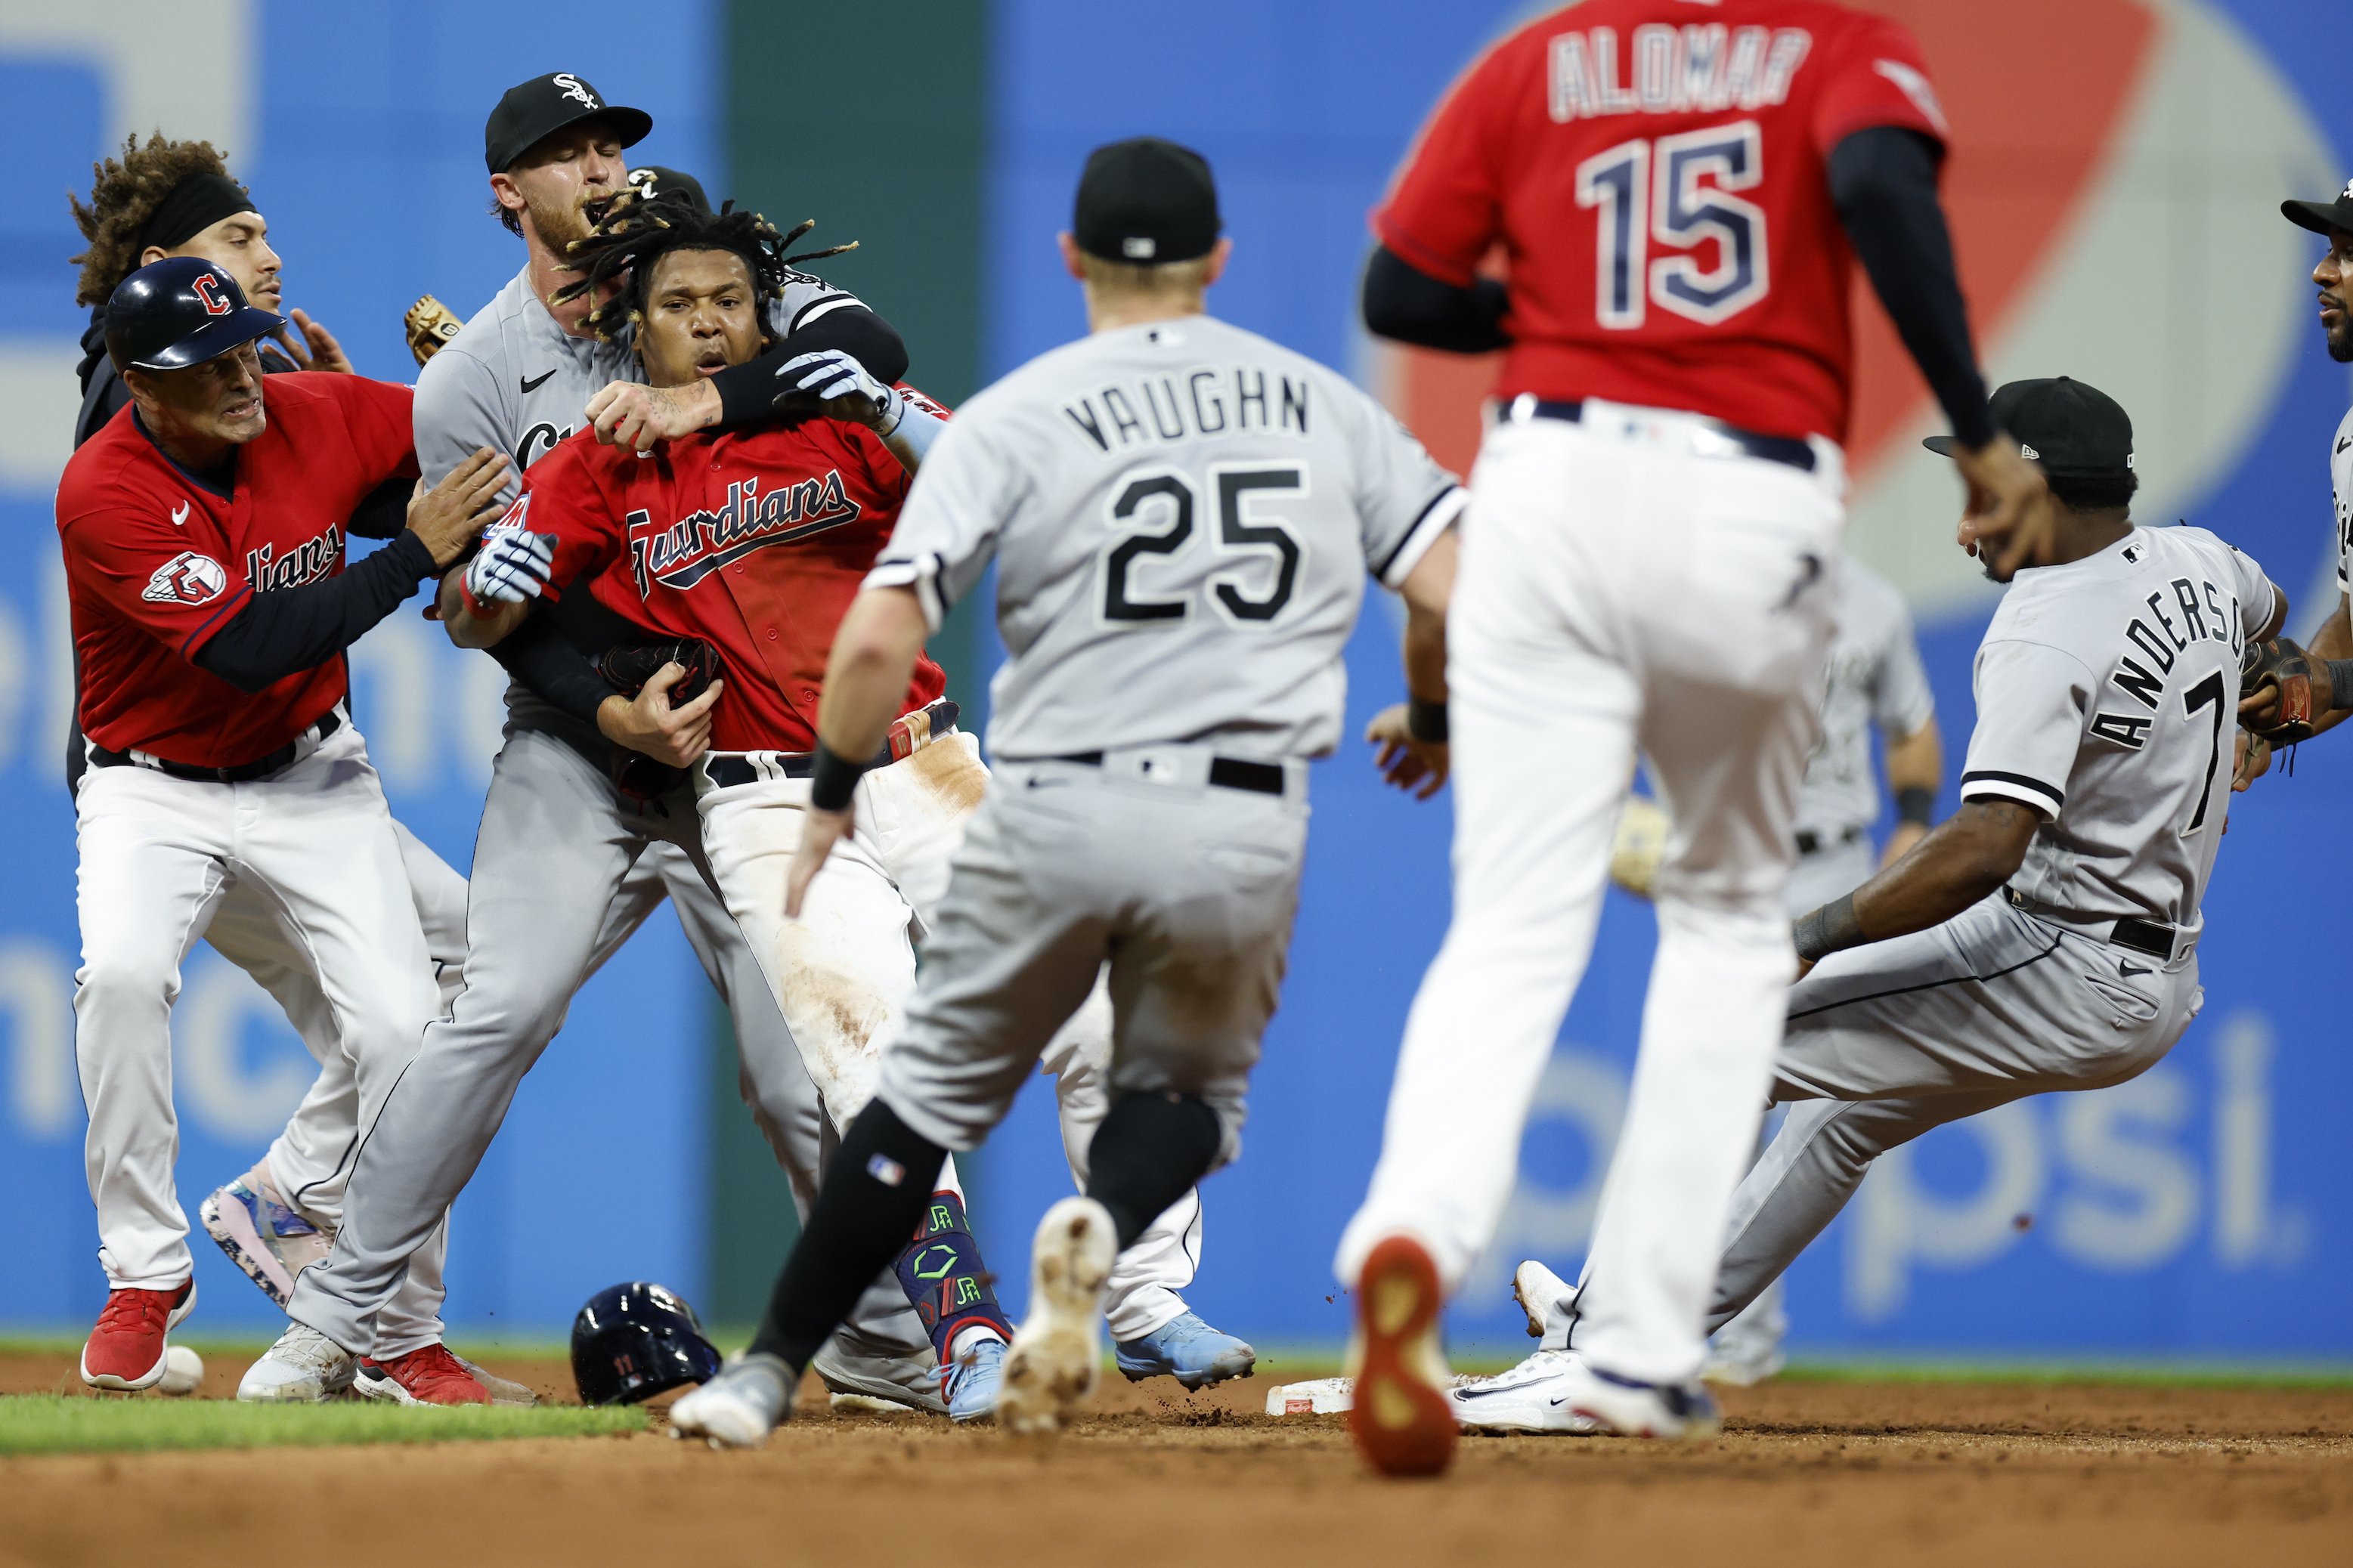 Jose Ramirez of the Cleveland Guardians is restrained by White Sox pitcher Michael Kopech after landing a heavy right hook to White Sox shortstop Tim Anderson's jaw during a game on August 5.